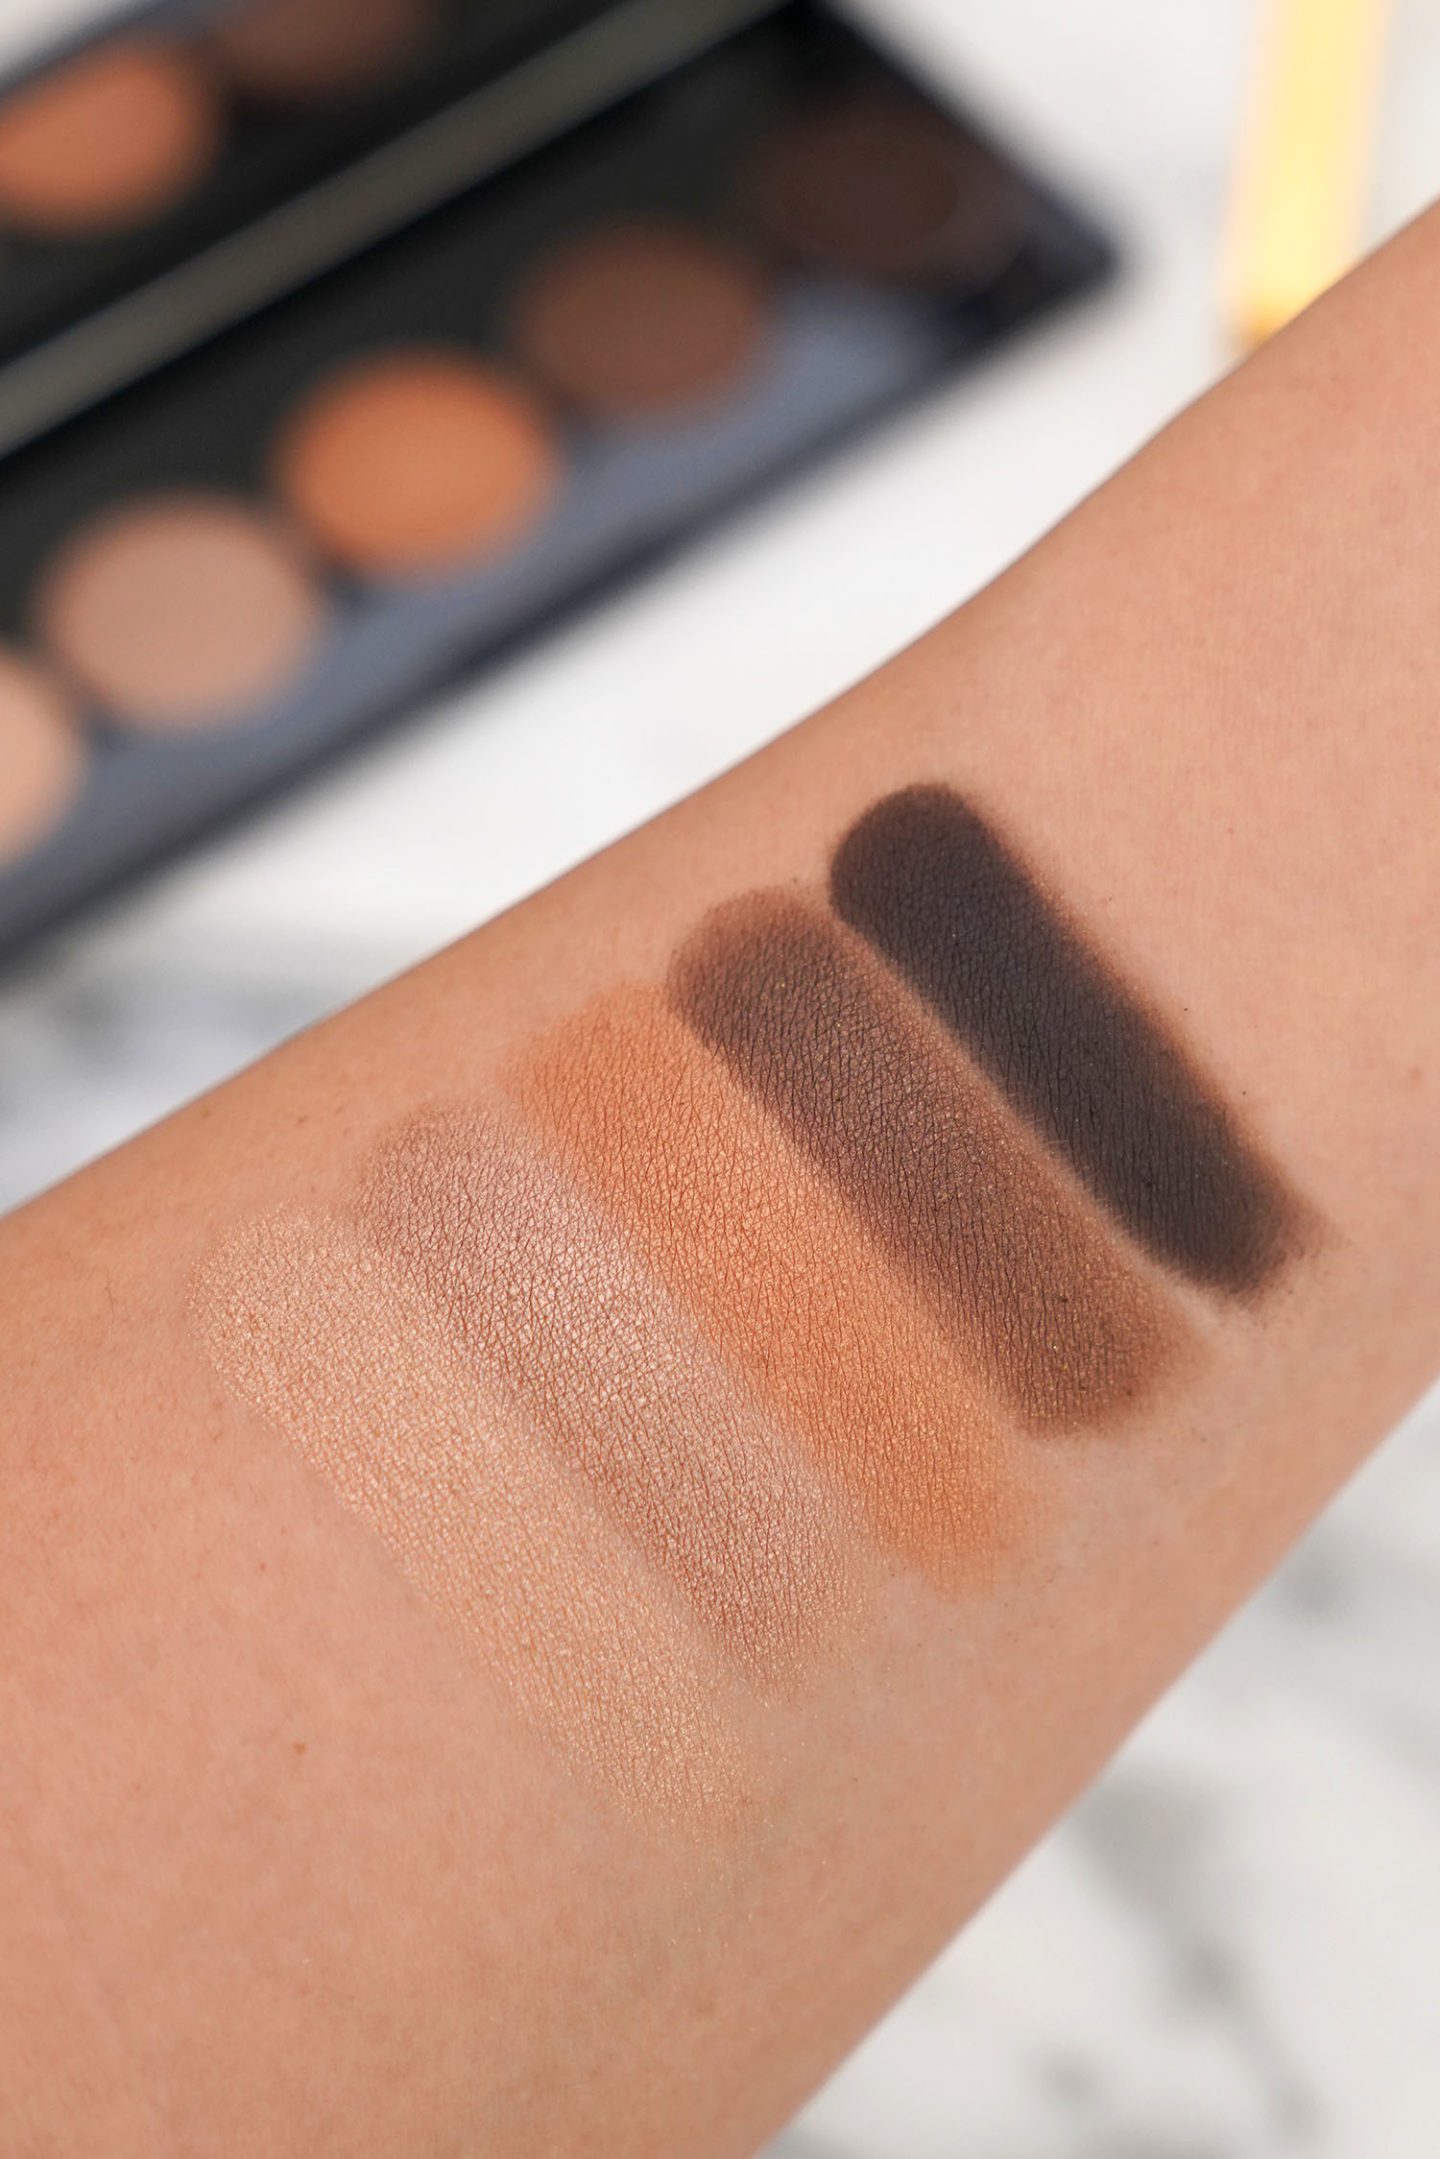 Bobbi Brown Real Nudes Eyeshadow Palettes in Golden Nudes swatches